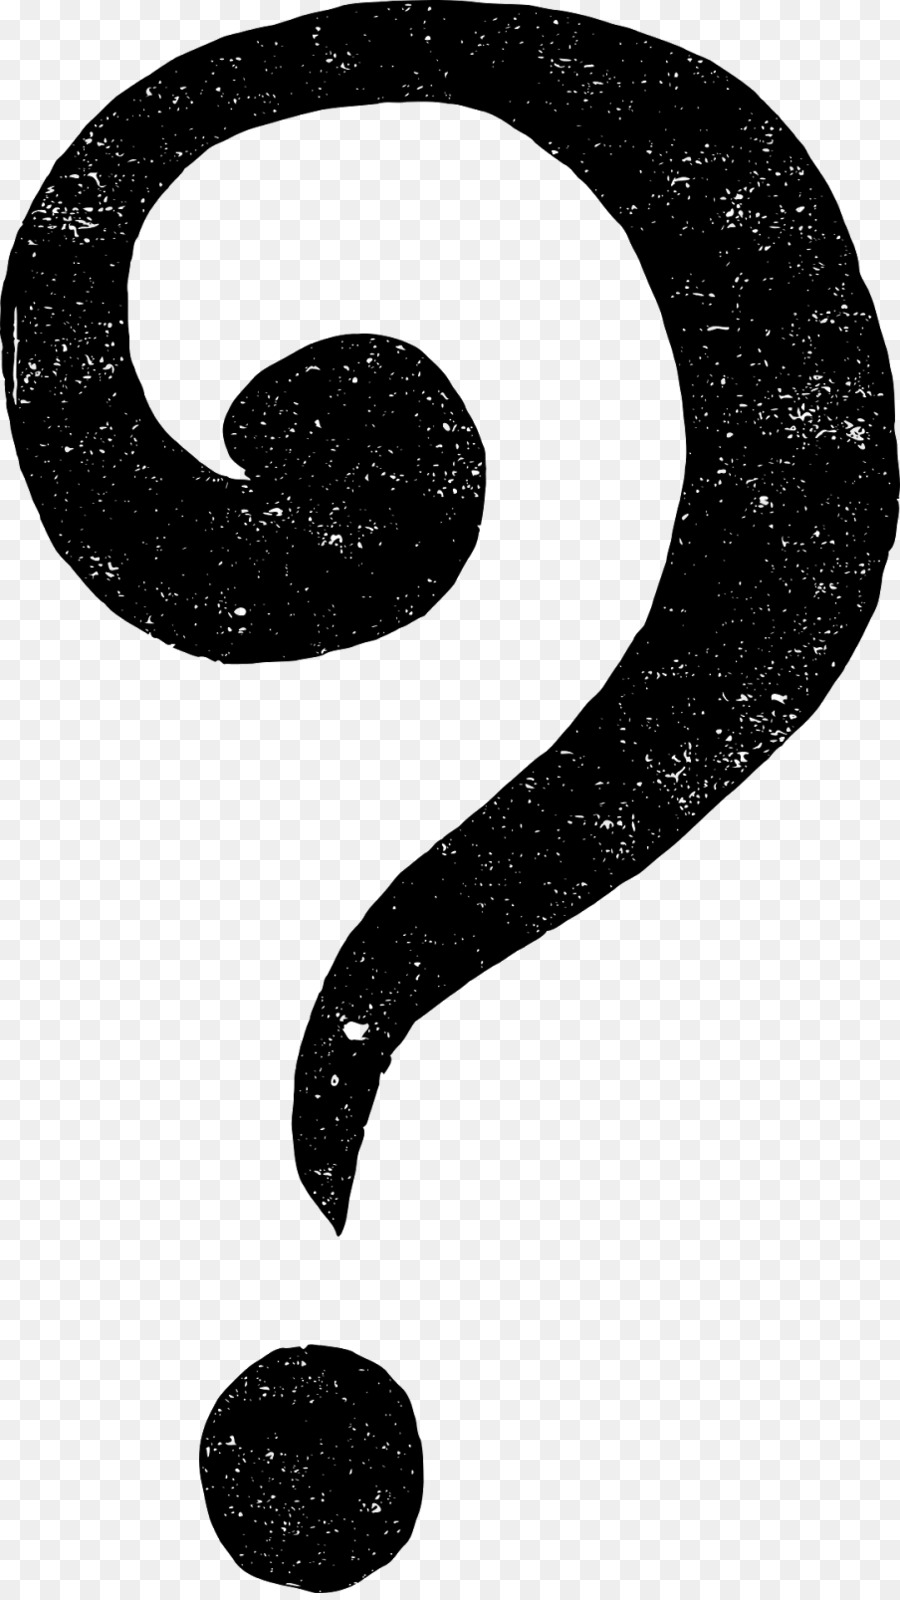 clipart question mark mystery